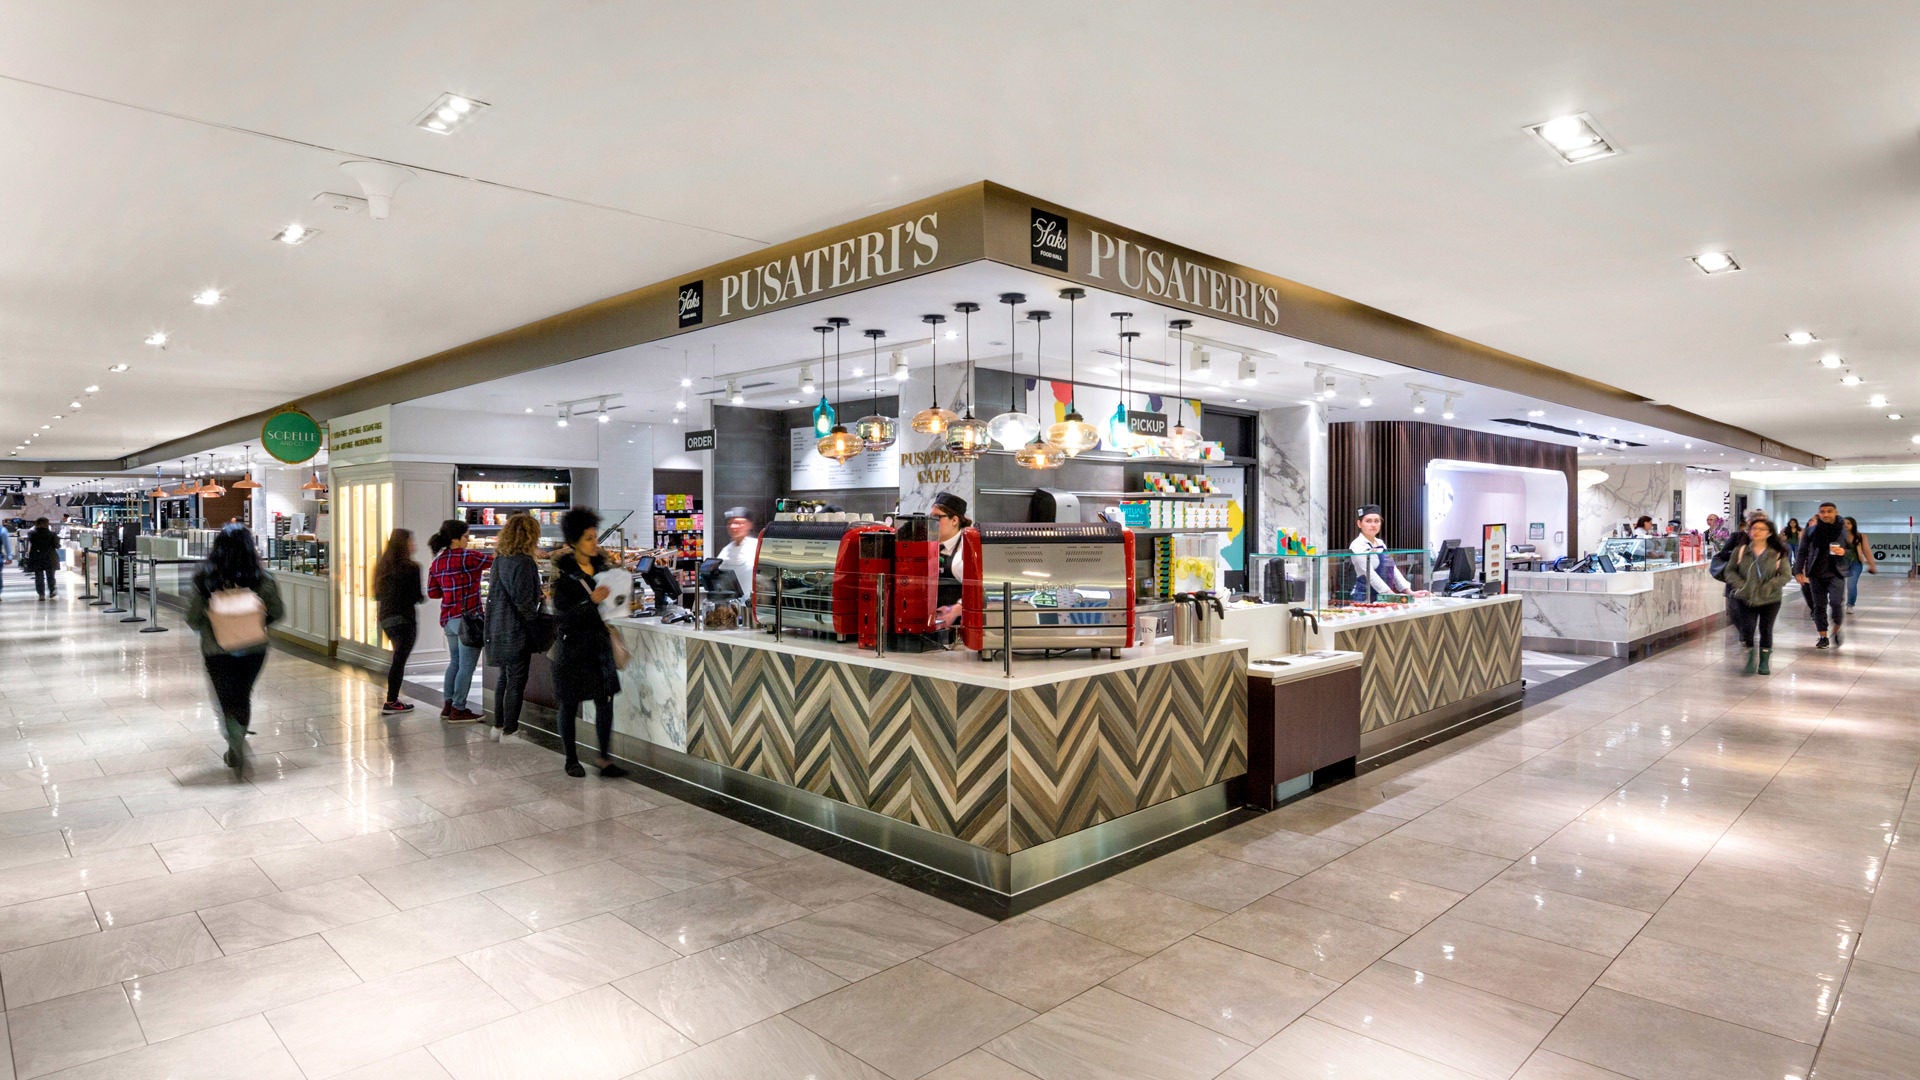 Saks Food Hall by Pusateri's - Eaton Center